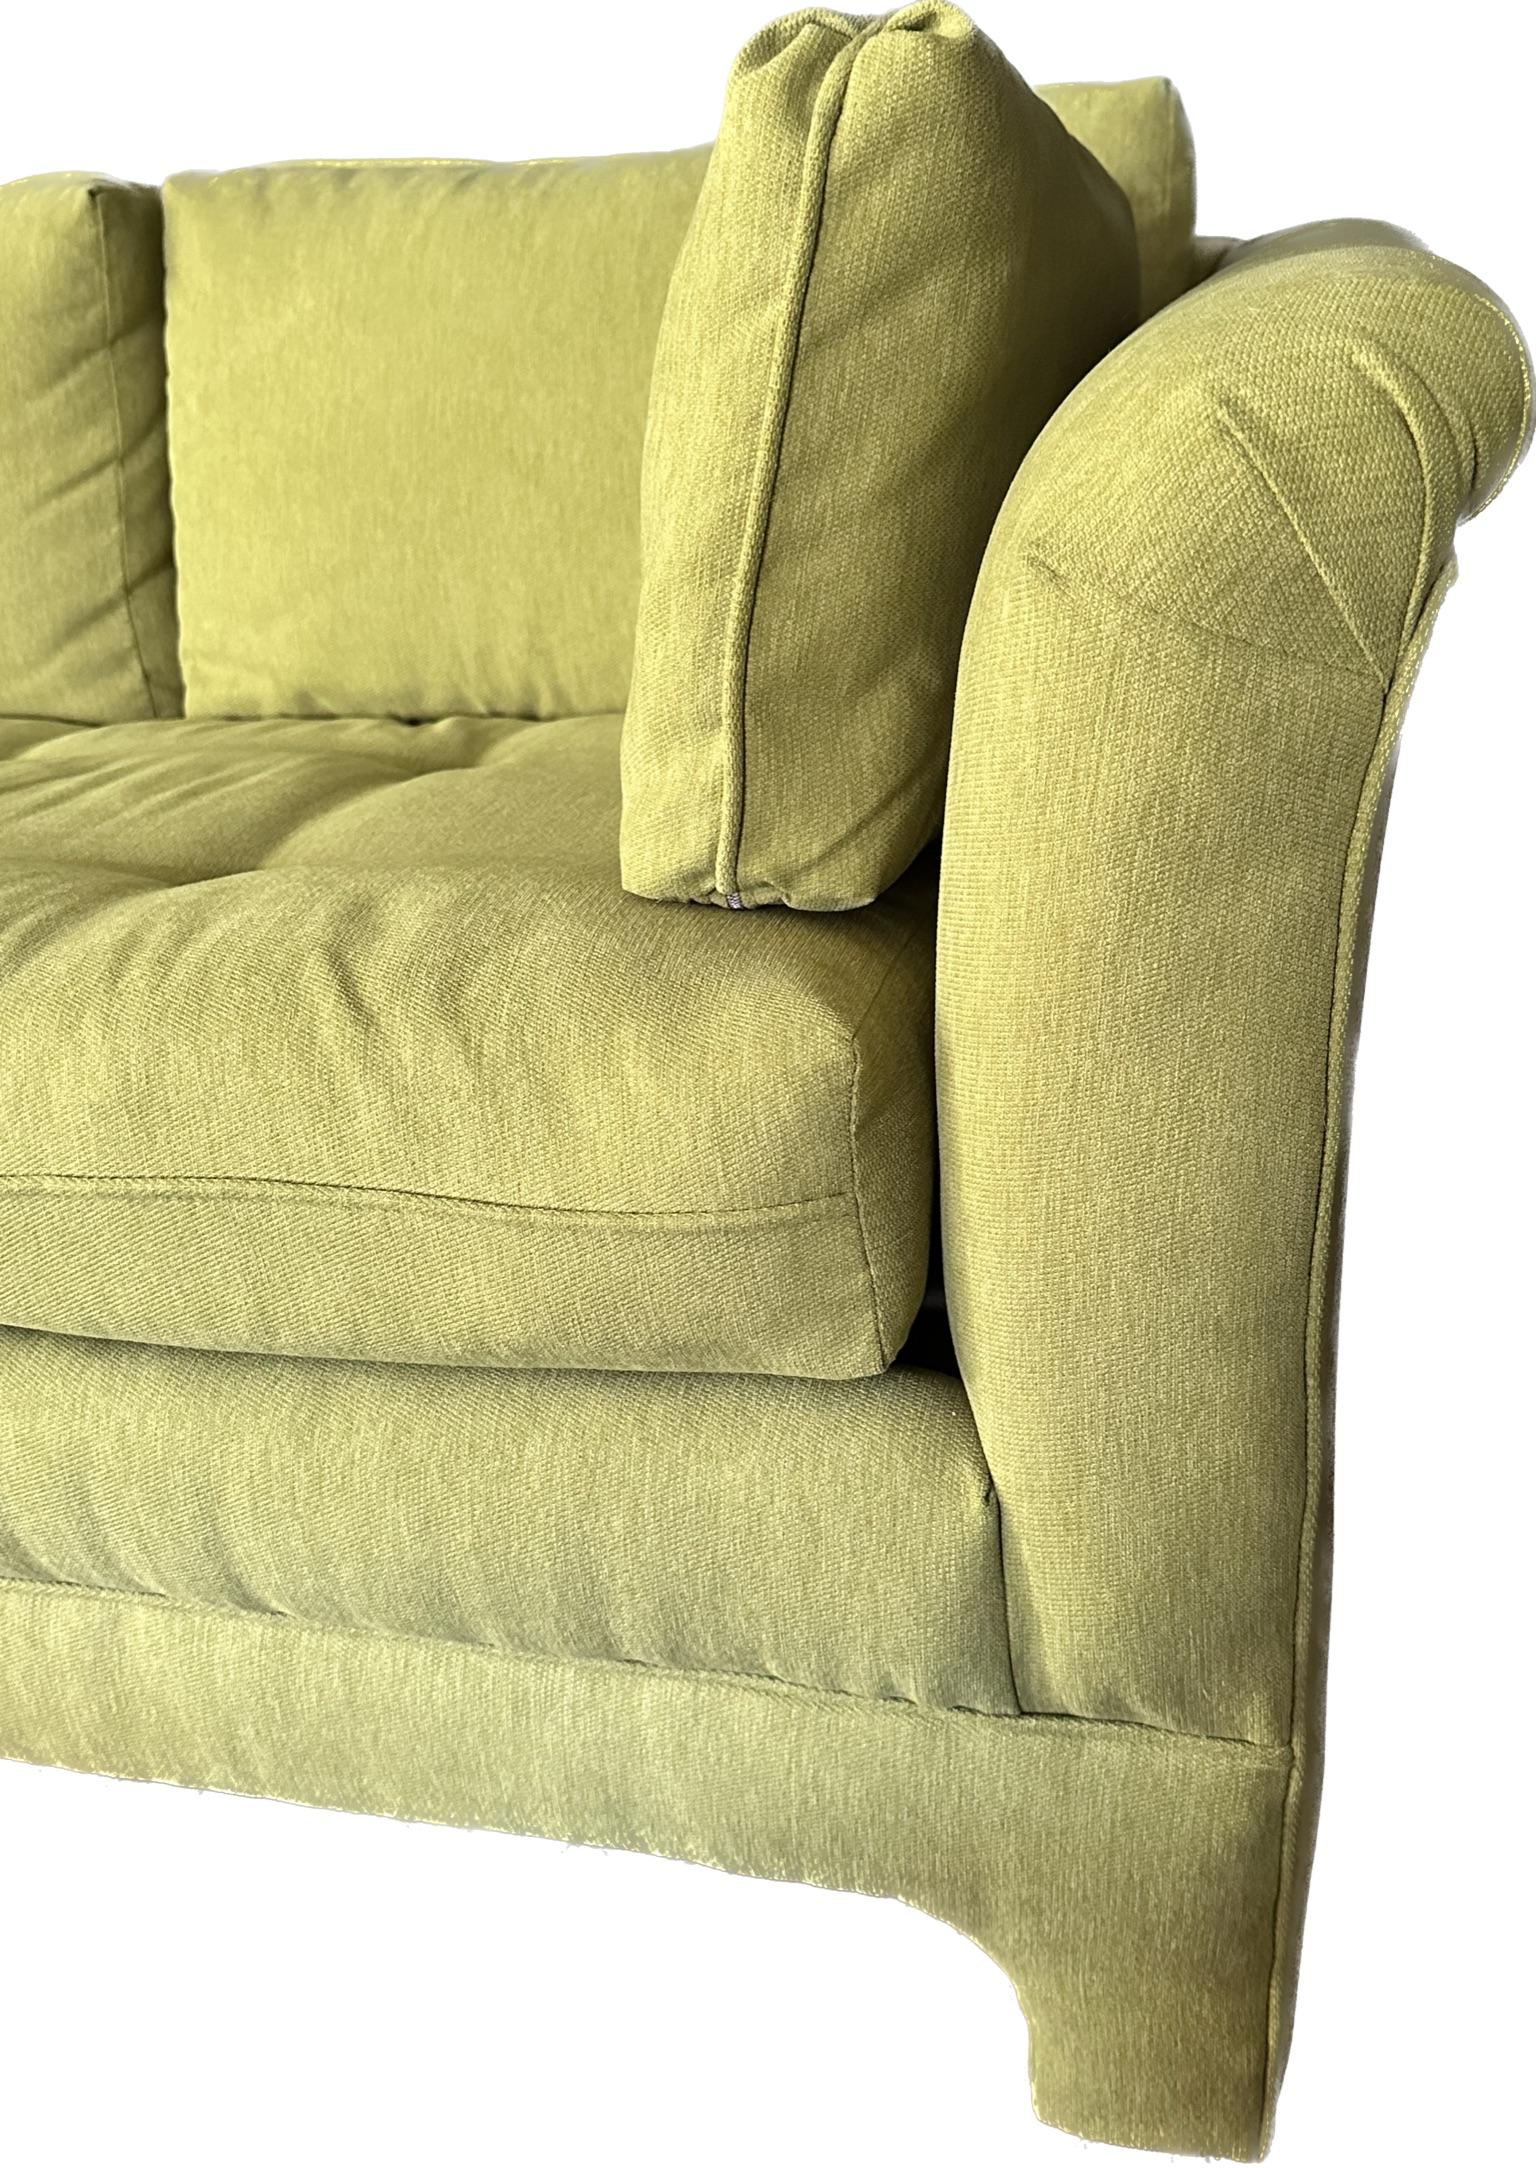 Chinoiserie Vintage 70s Bench Seat Sofa Newly Upholstered in Chartreuse Crypton Fabric For Sale